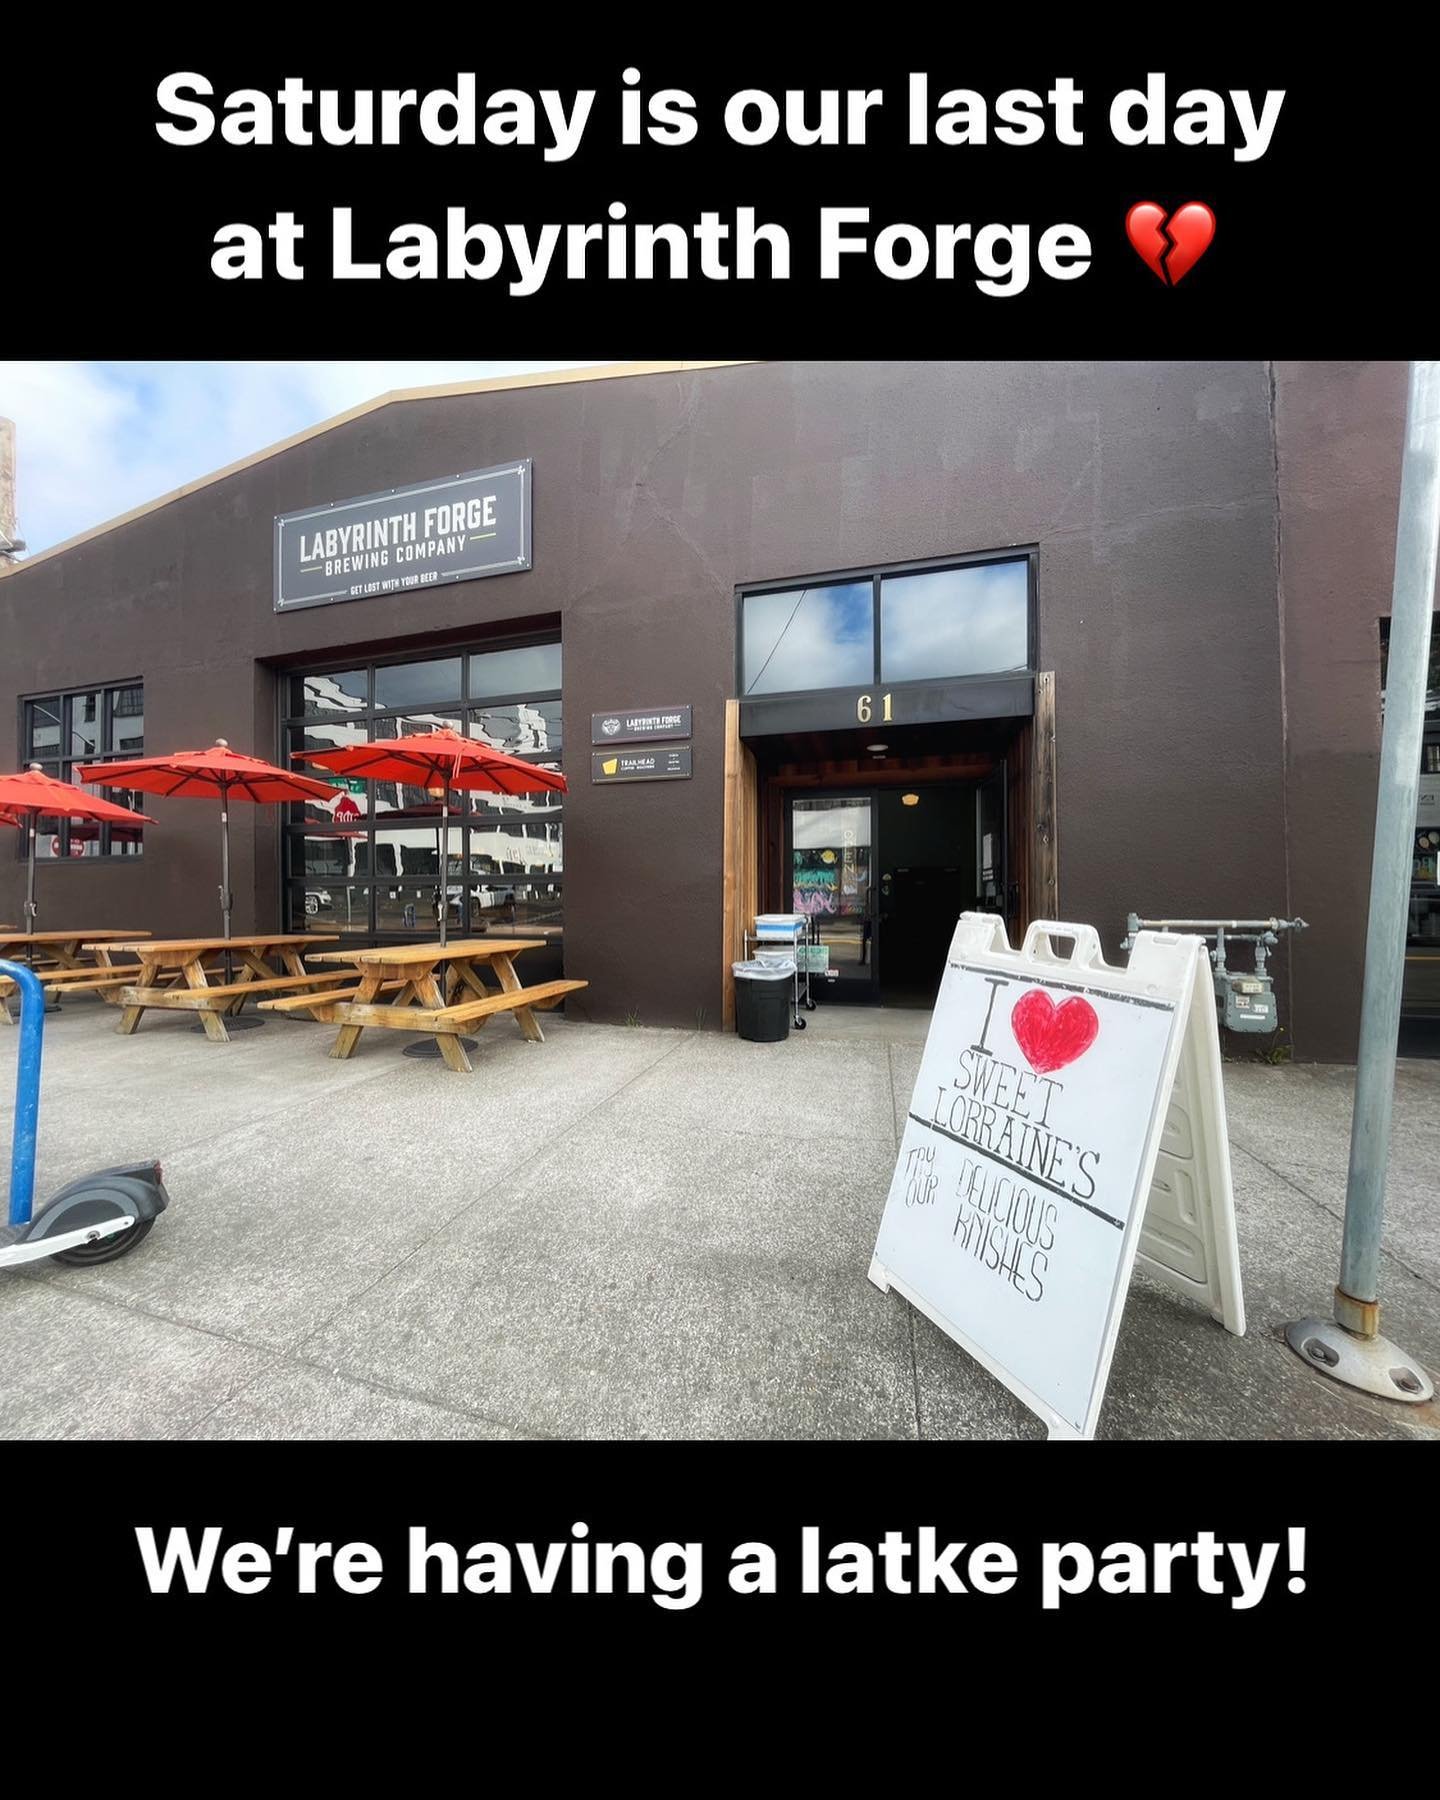 It&rsquo;s a latke party this Saturday! You may have heard that @labyrinthforgebeer has had to close suddenly, so we are losing our main kitchen. Our last day is Saturday April 13th 💔 We want to invite all of you to send us off on a high note! We&rs